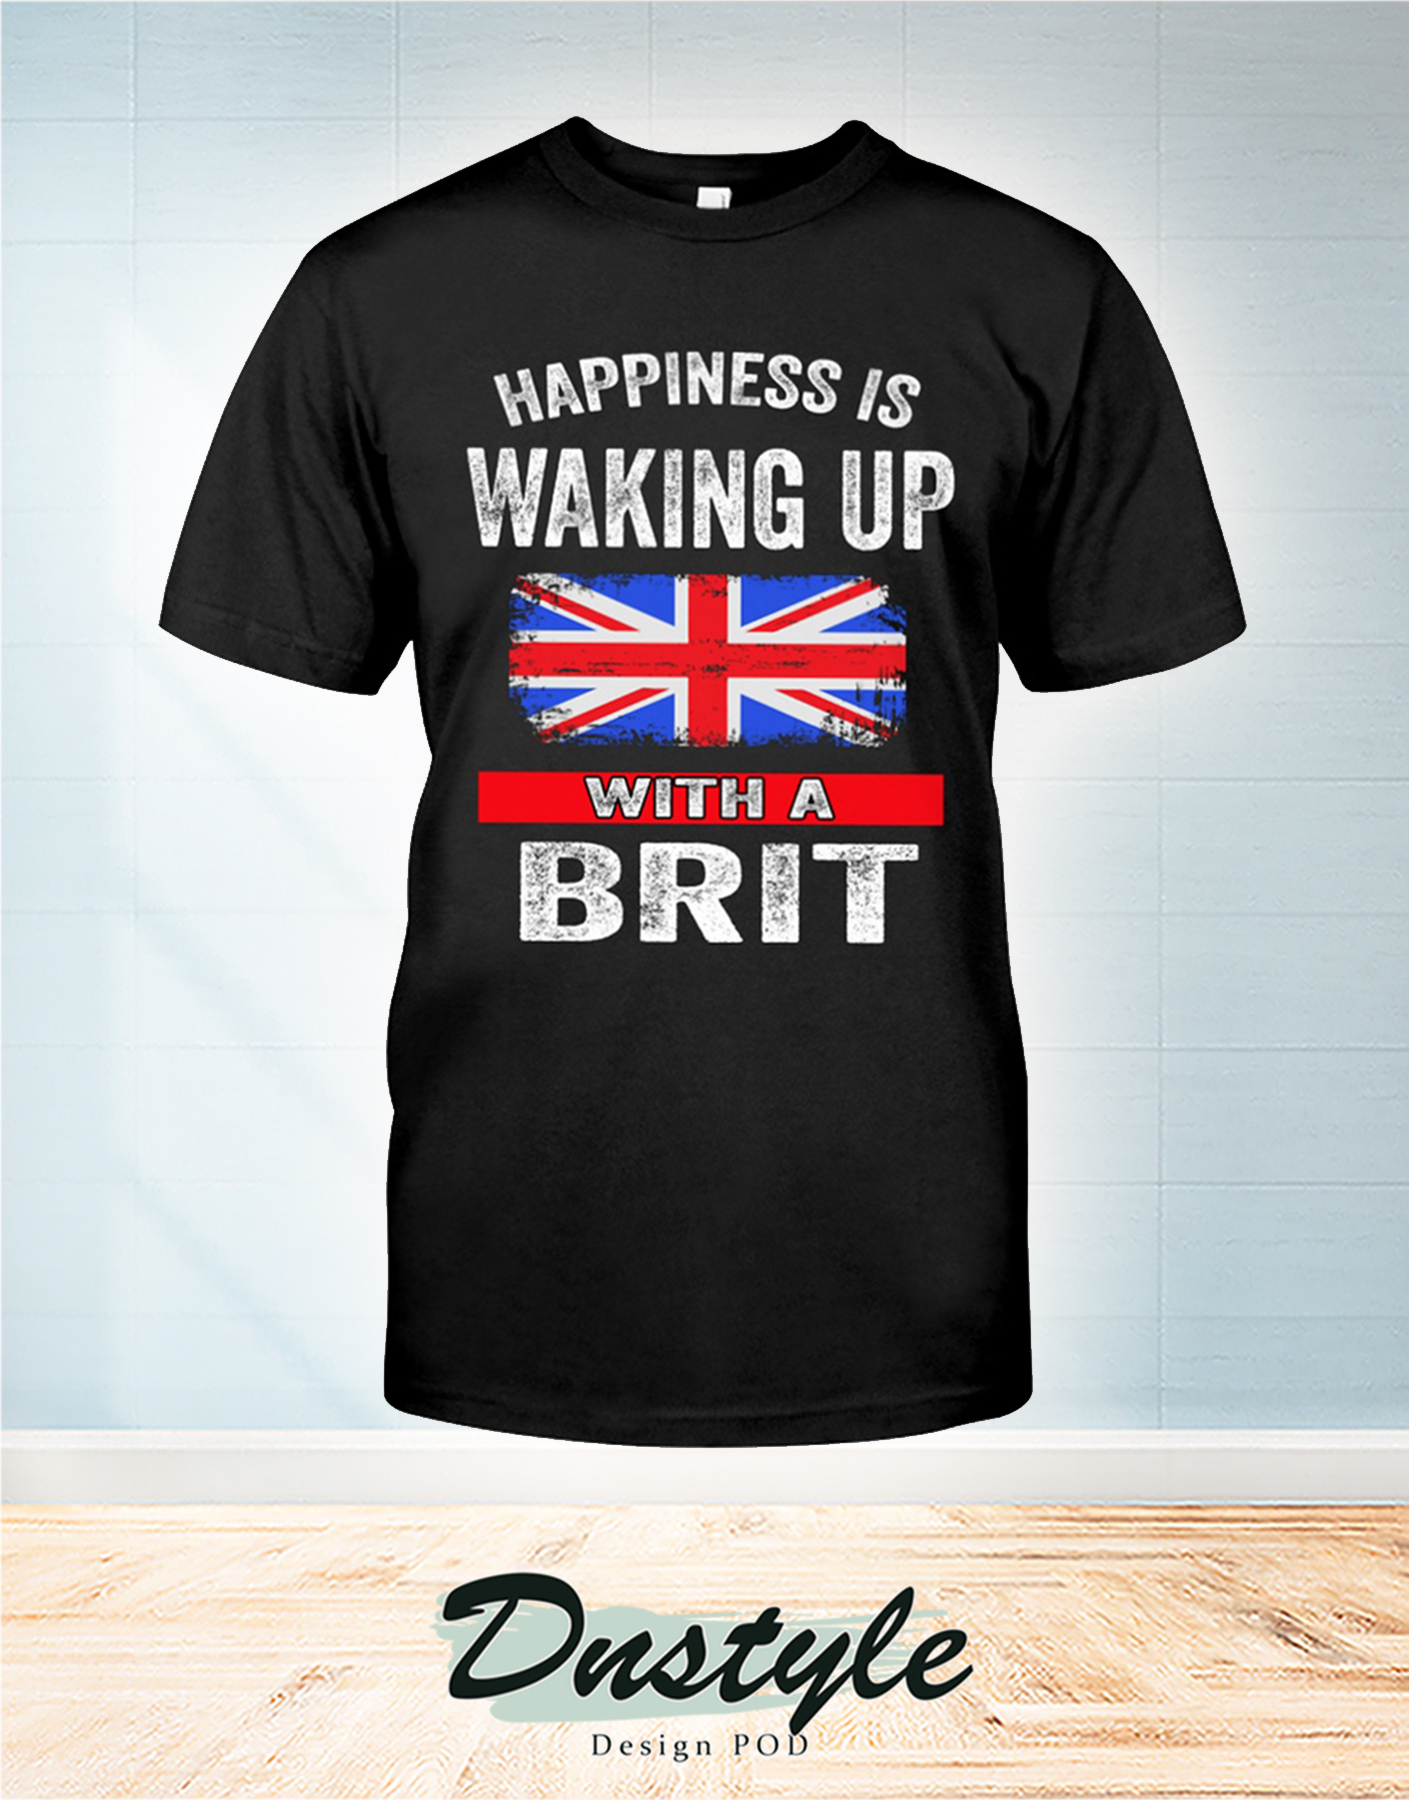 Happiness is waking up with a Brit t-shirt